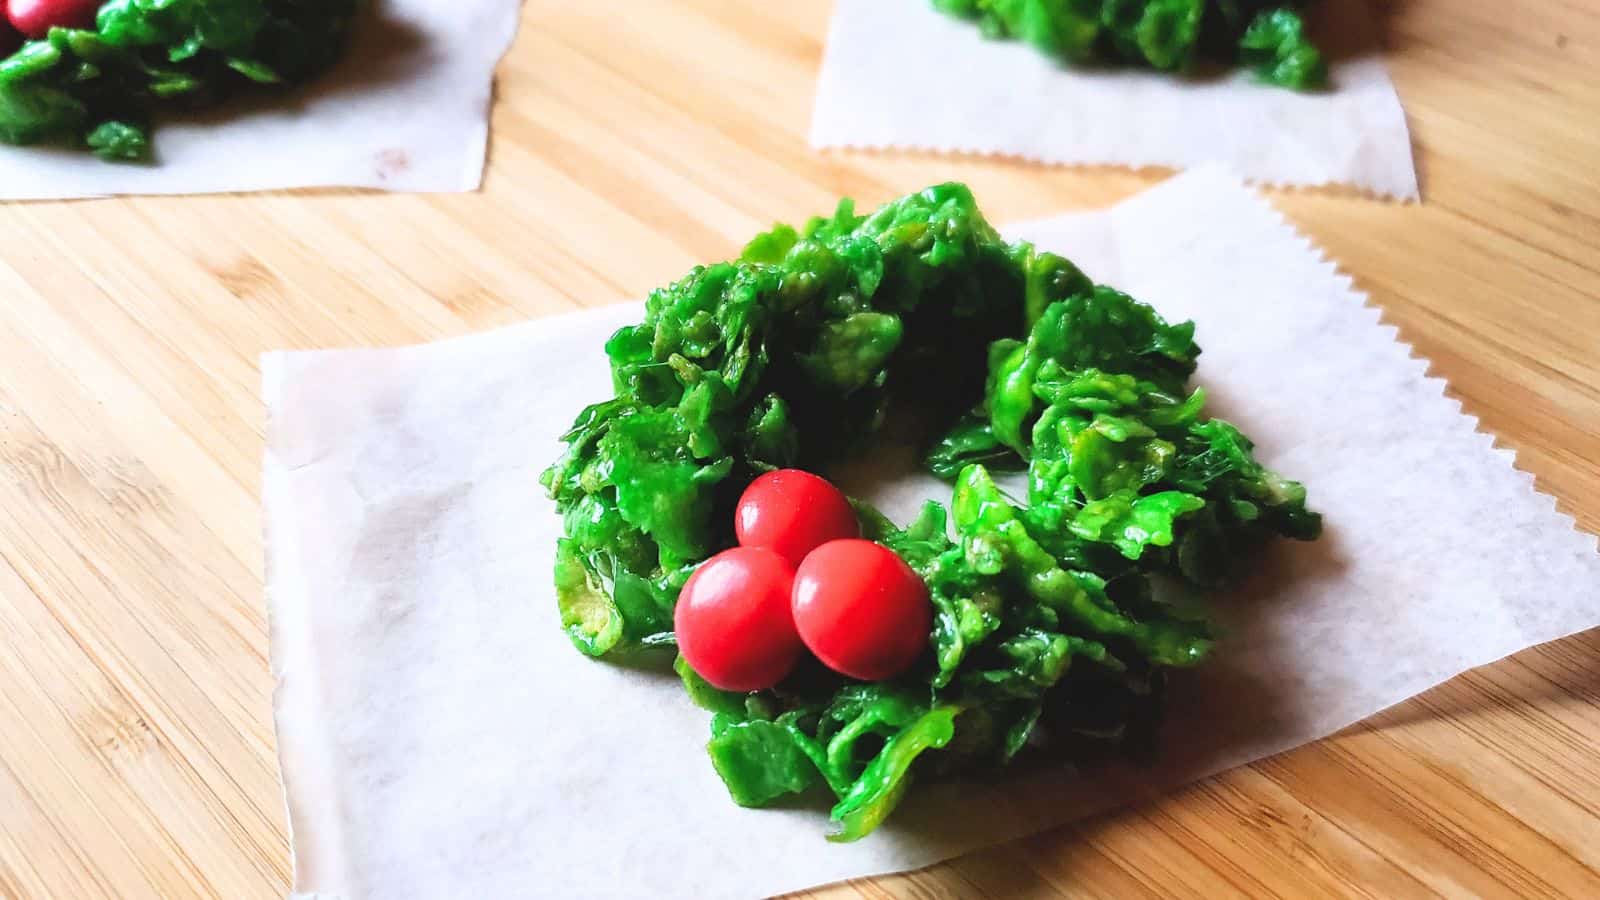 Image shows Holly Wreath Cookies on small pieces of parchment paper sitting on a wooden table.